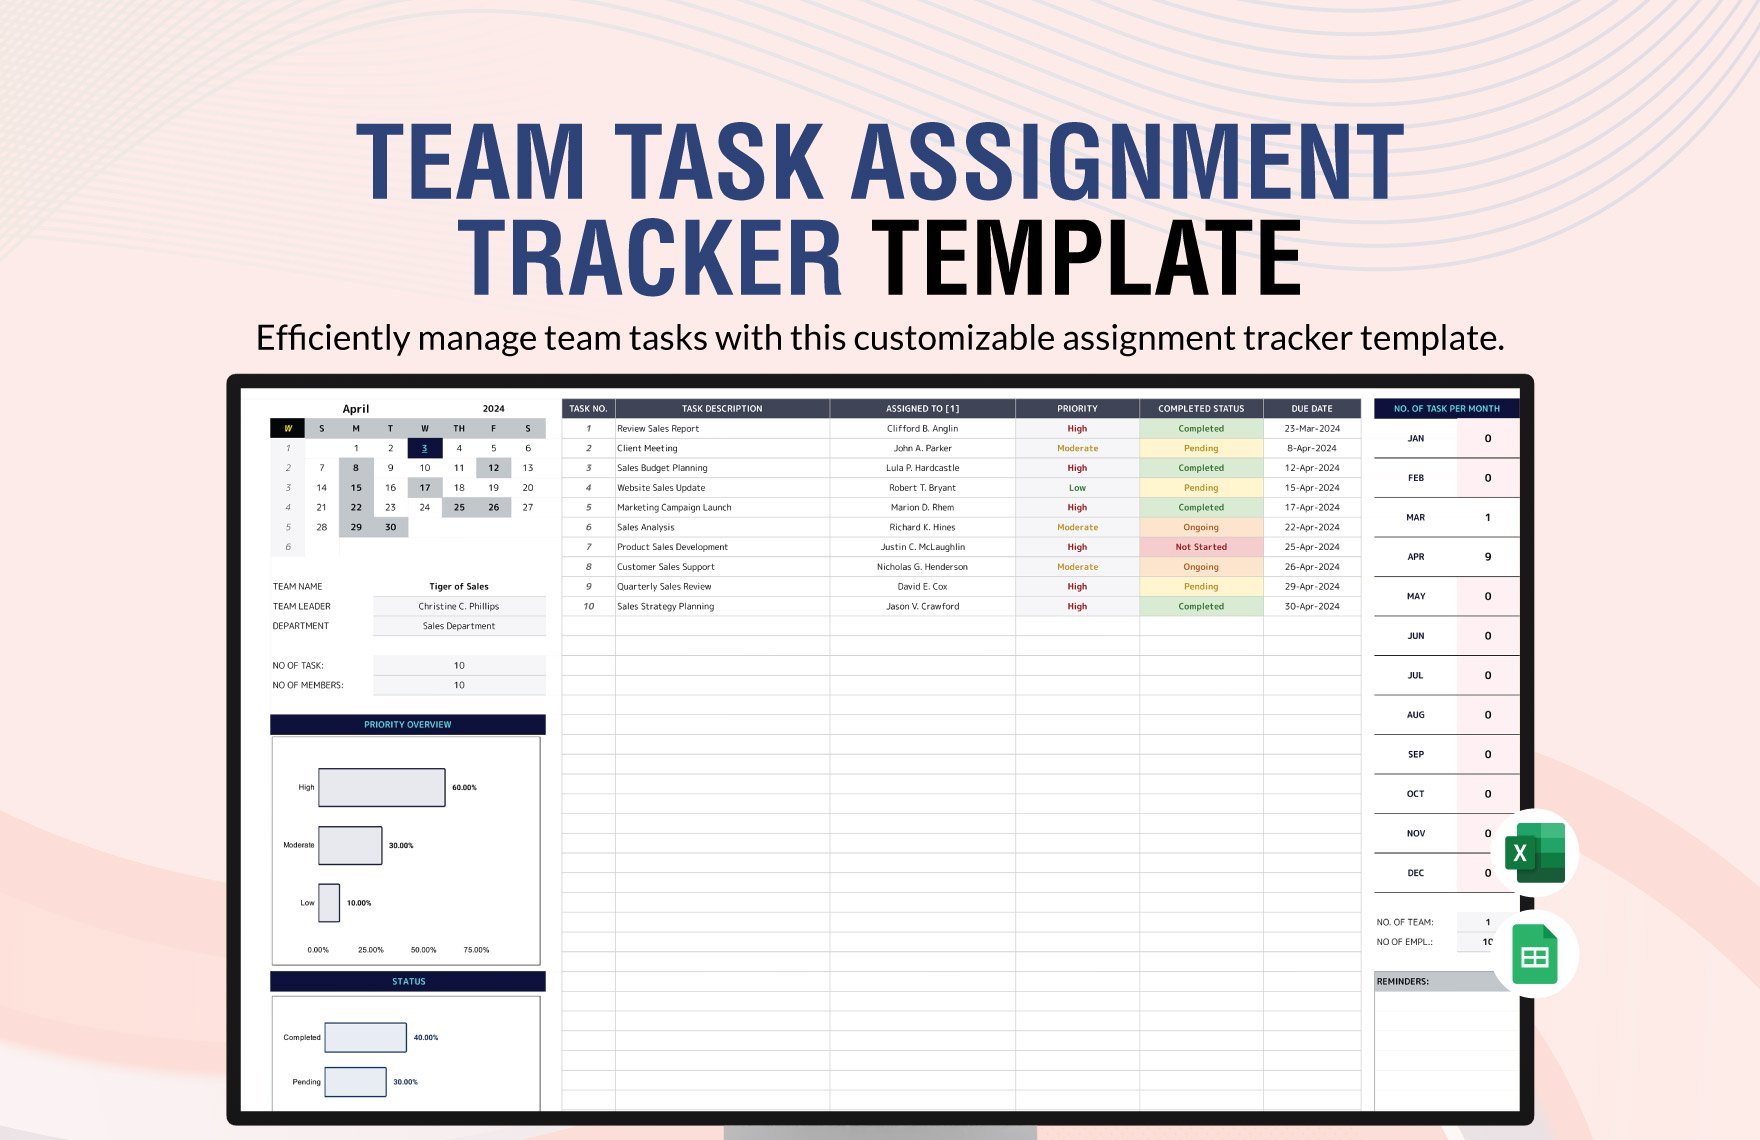 Team Task Assignment Tracker Template in Excel, Google Sheets